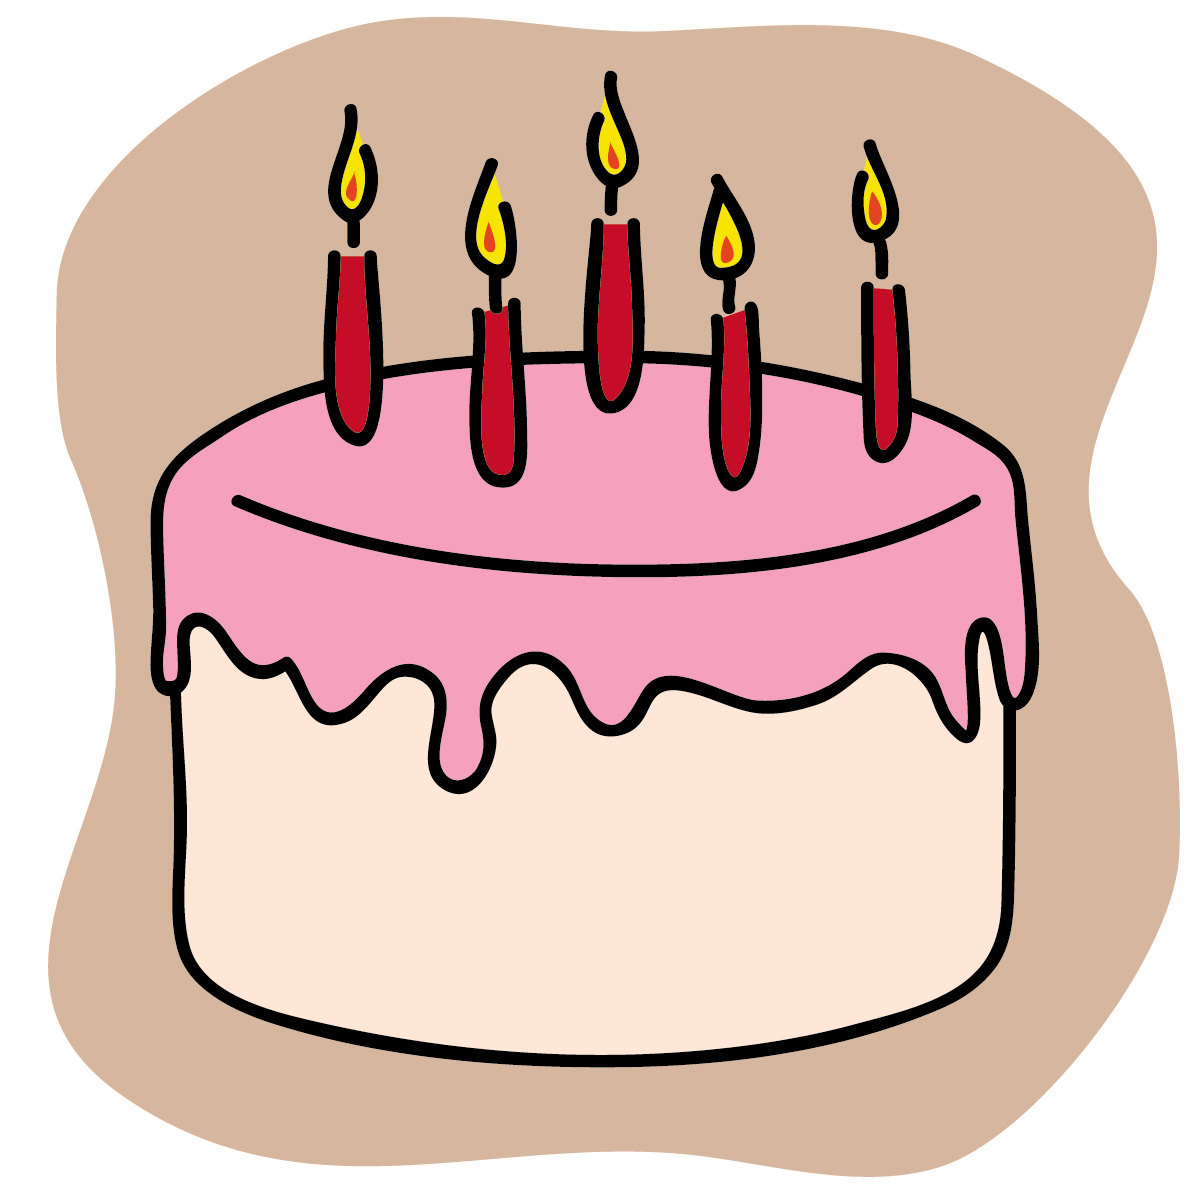 Free Birthday Cake Clipart, Download Free Clip Art, Free